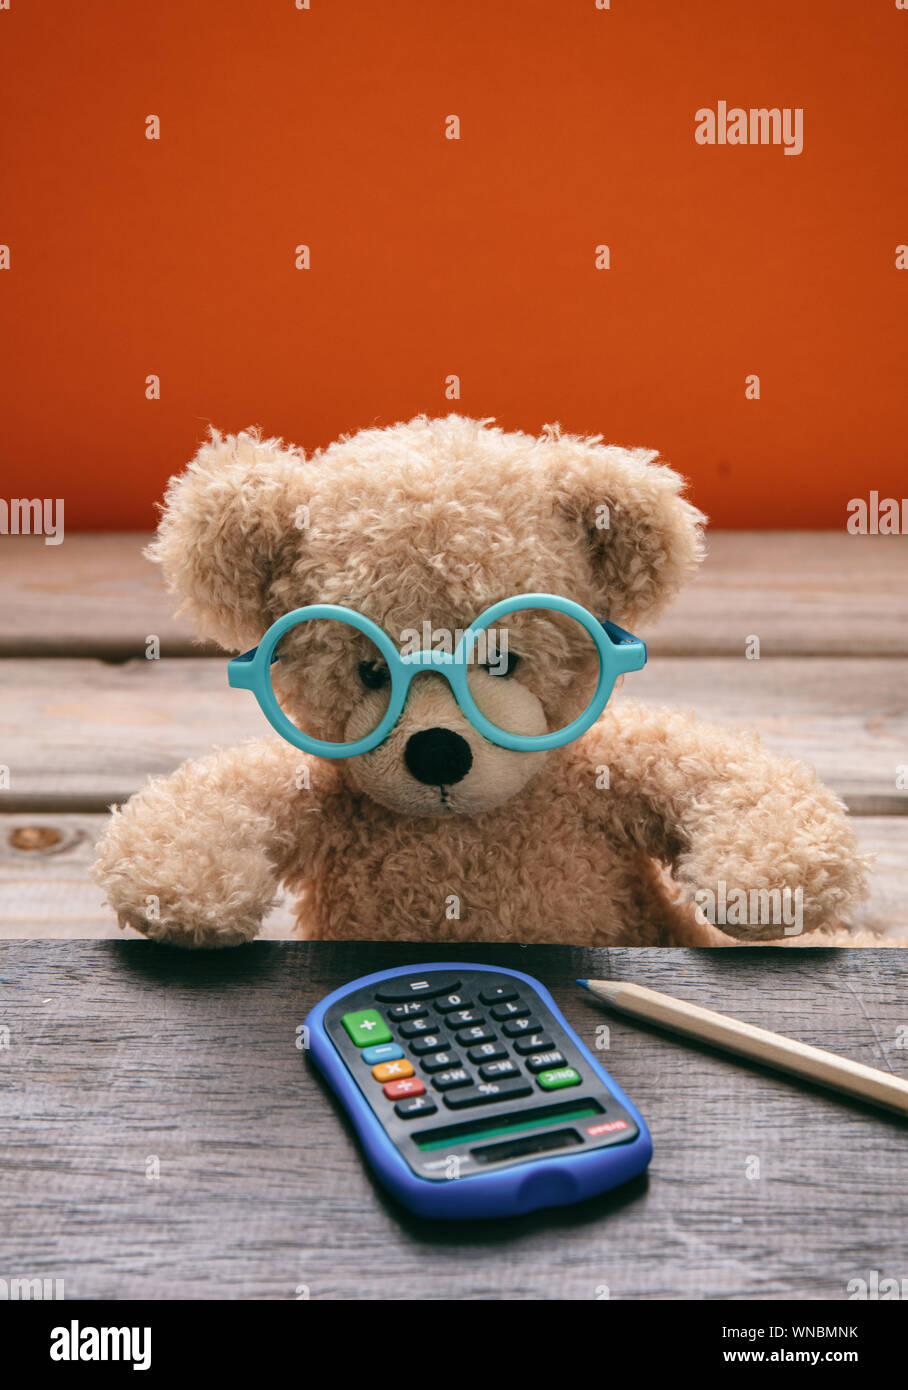 Back to school, Maths concept. Smart kid cute teddy wearing blue eyeglasses working with a calculator on his desk, orange color background Stock Photo